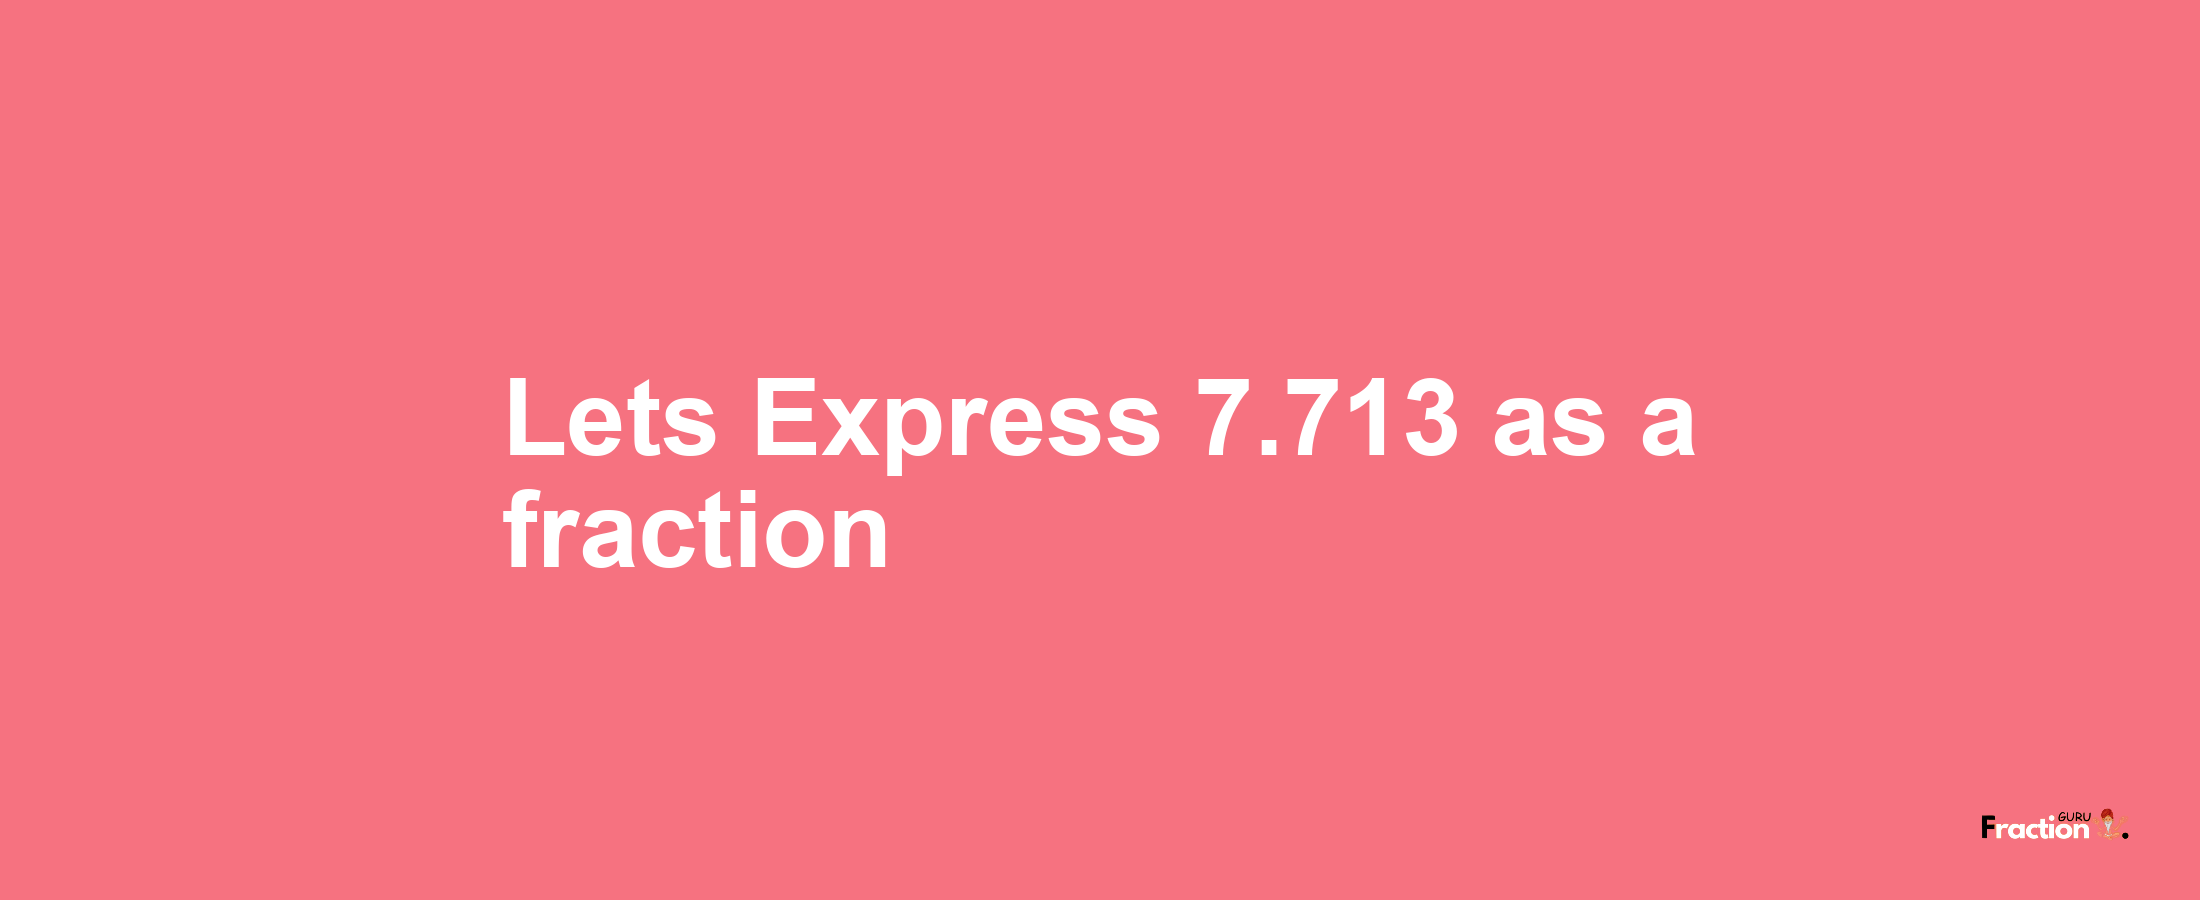 Lets Express 7.713 as afraction